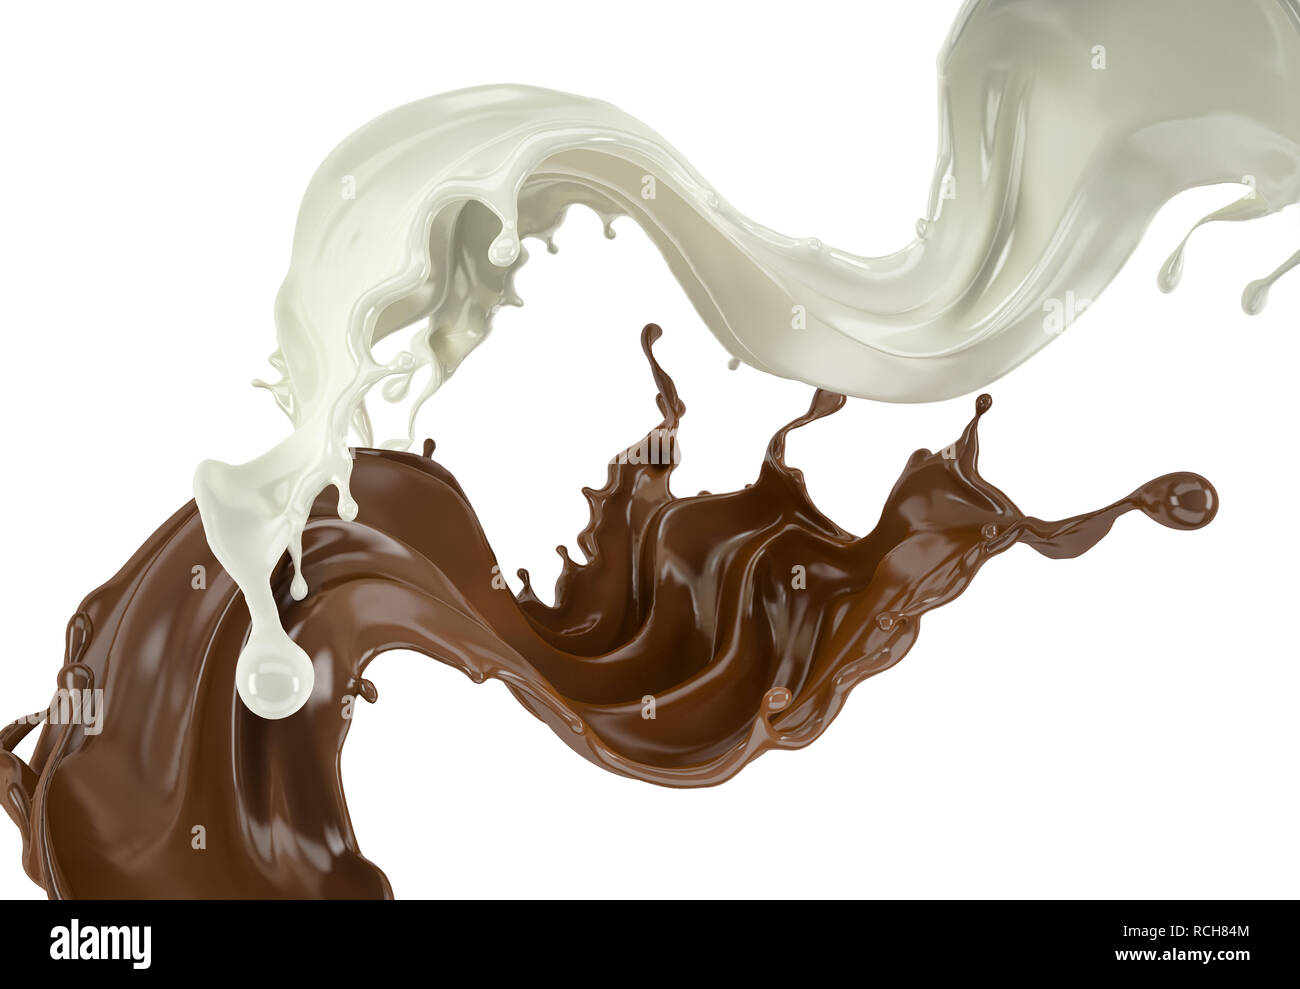 Milk and chocolate , or paint splashes flying in the air. On white background. Stock Photo